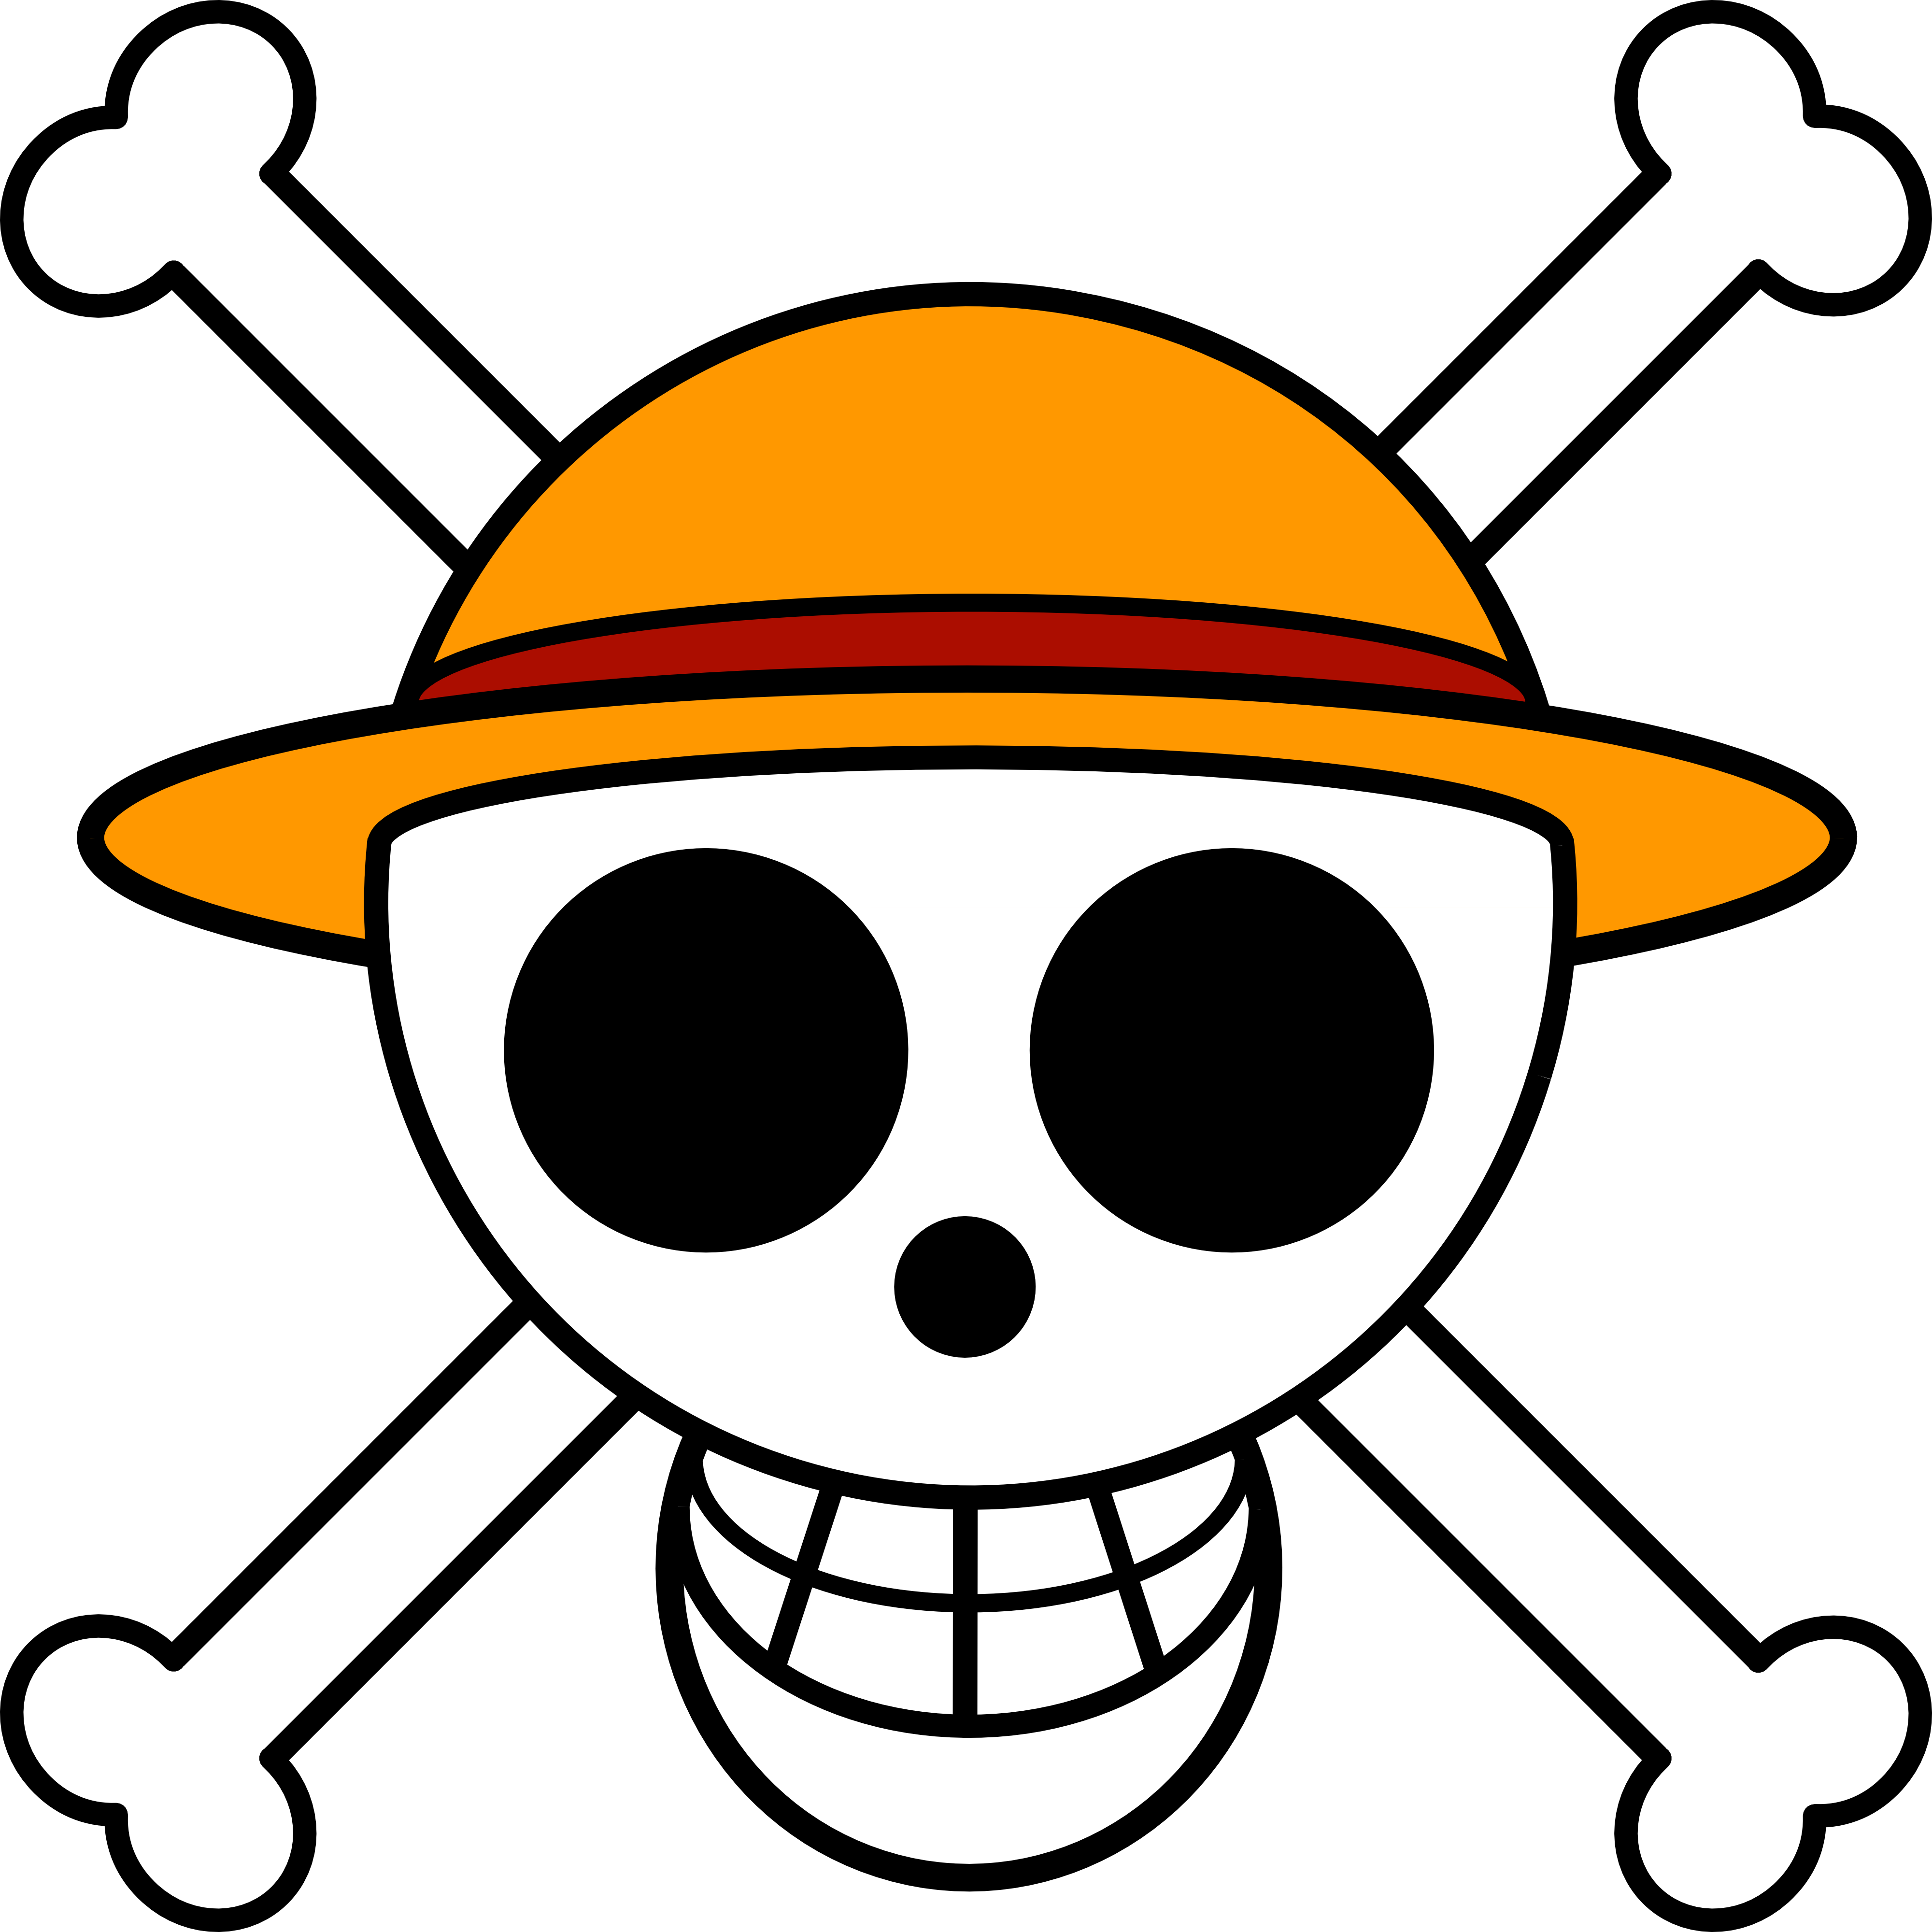 Pirates, Straws and Hats